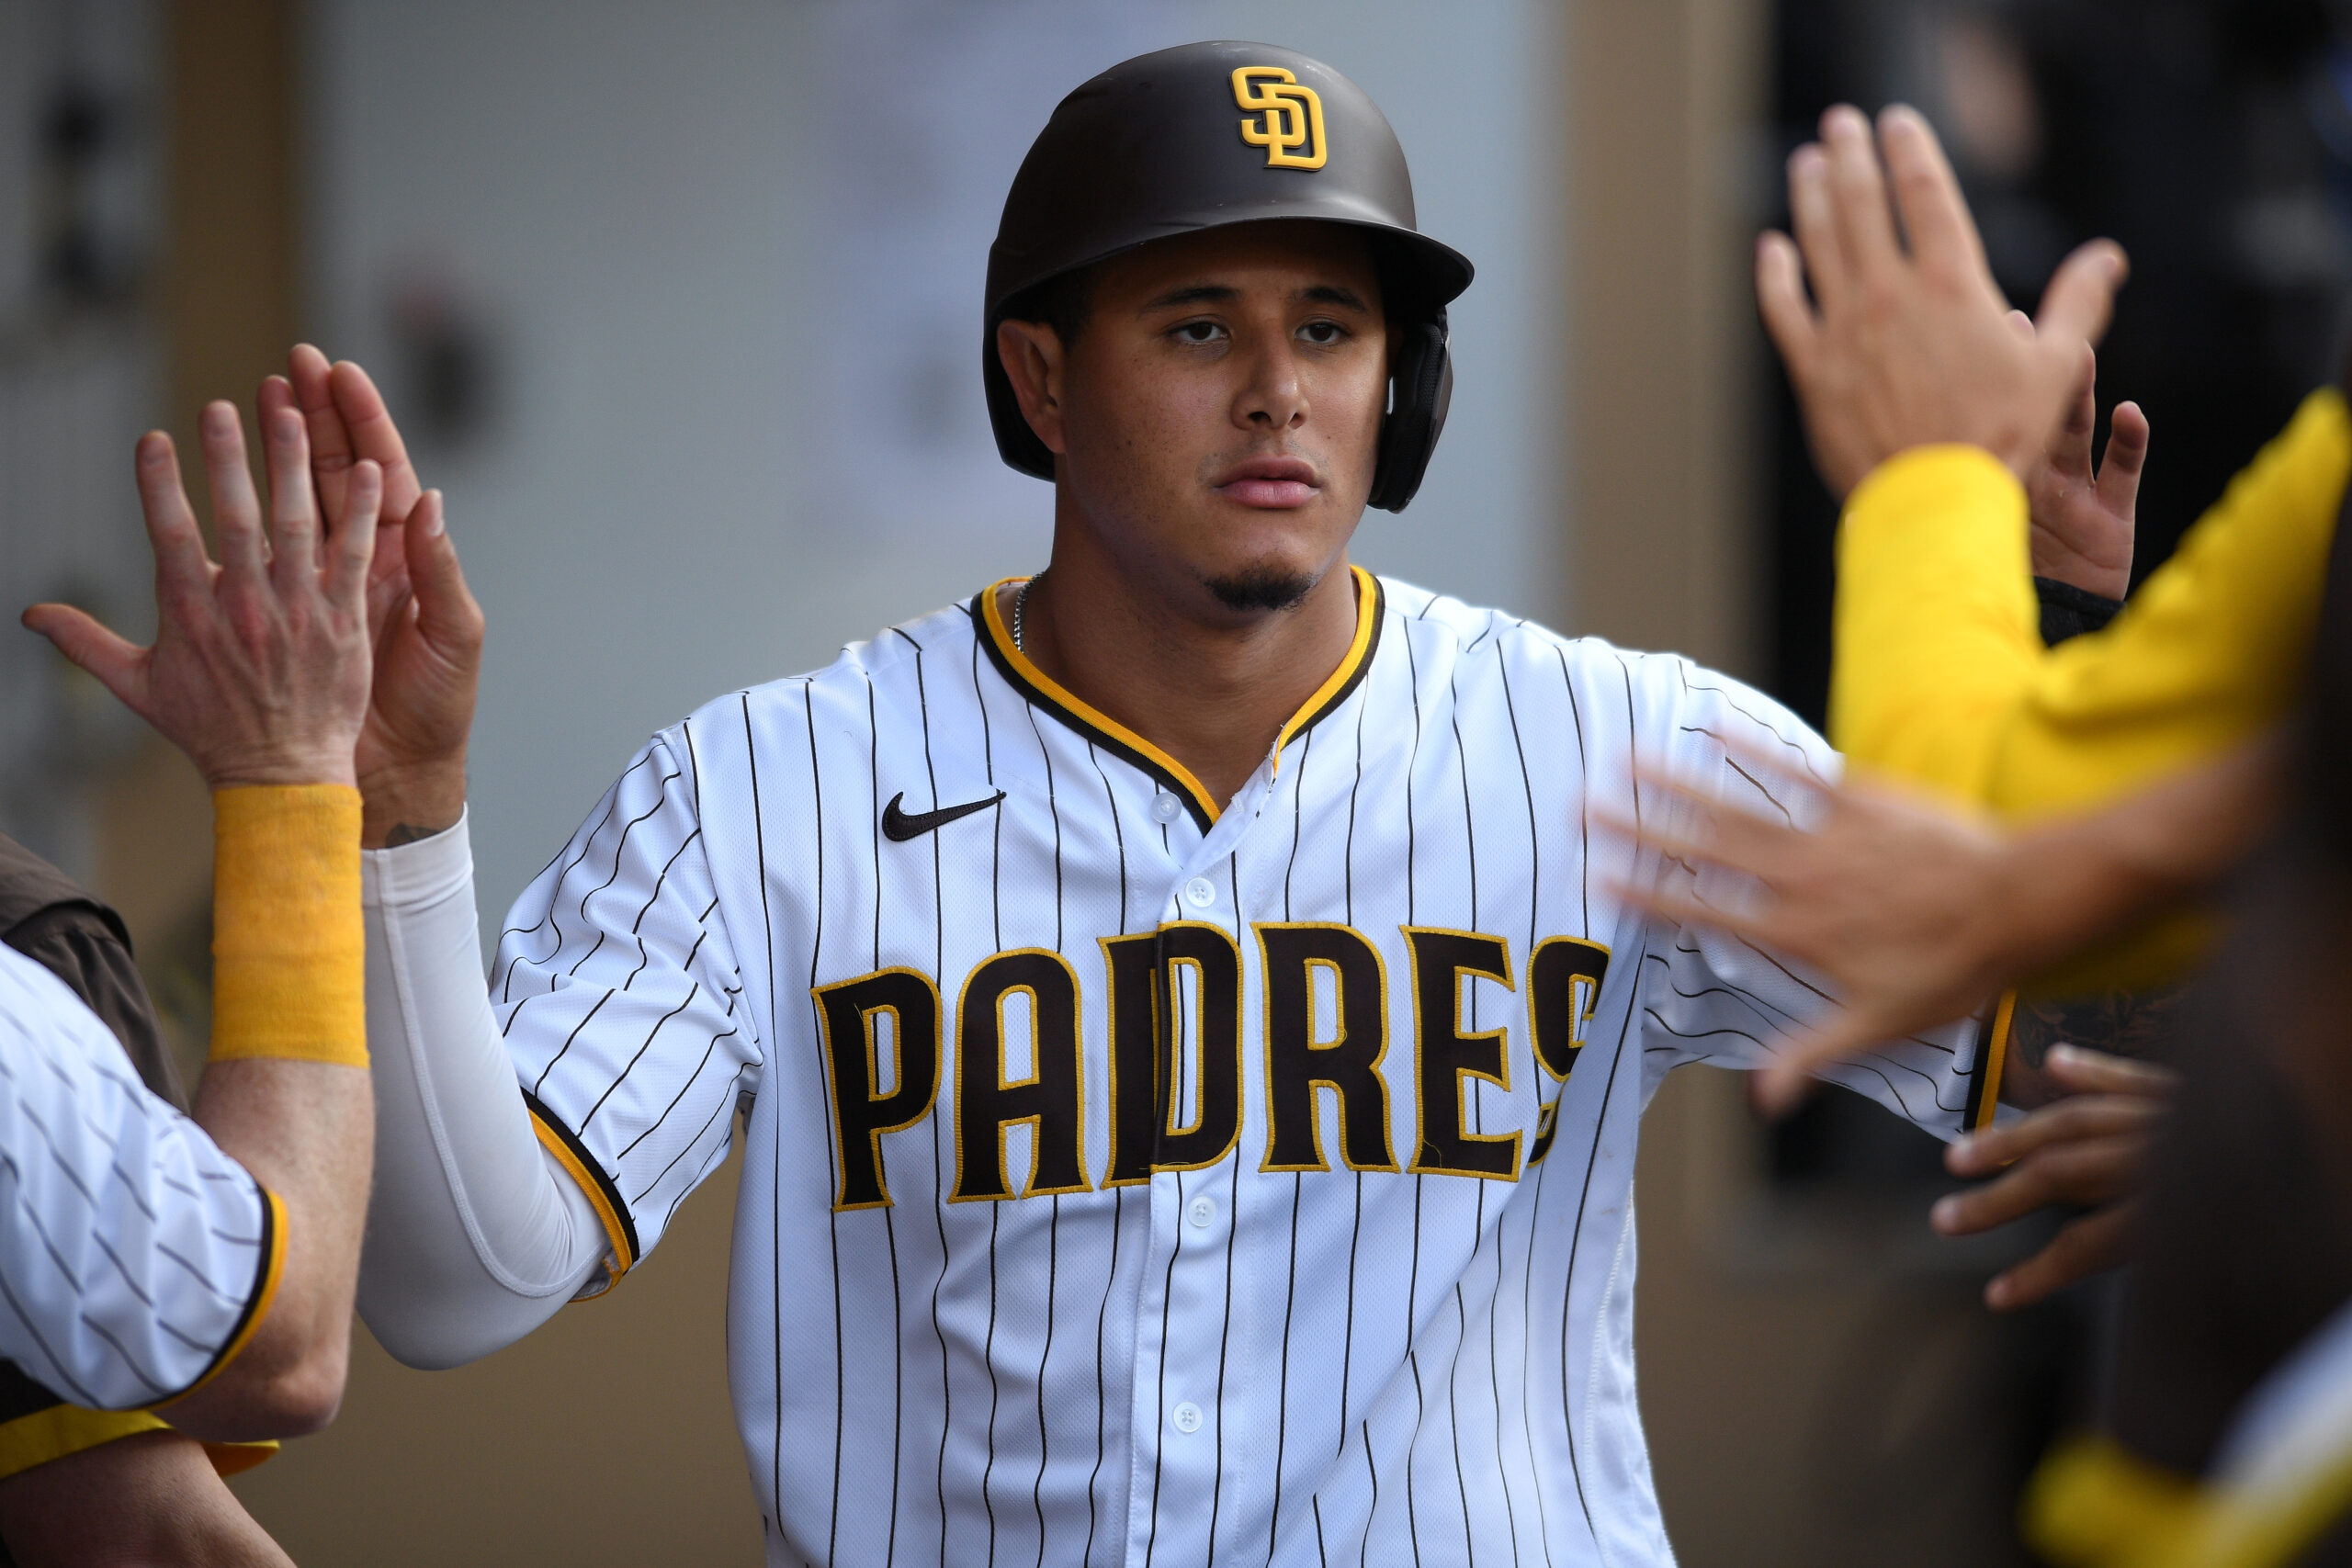 San Diego Padres: New Uniforms for 2017 Released